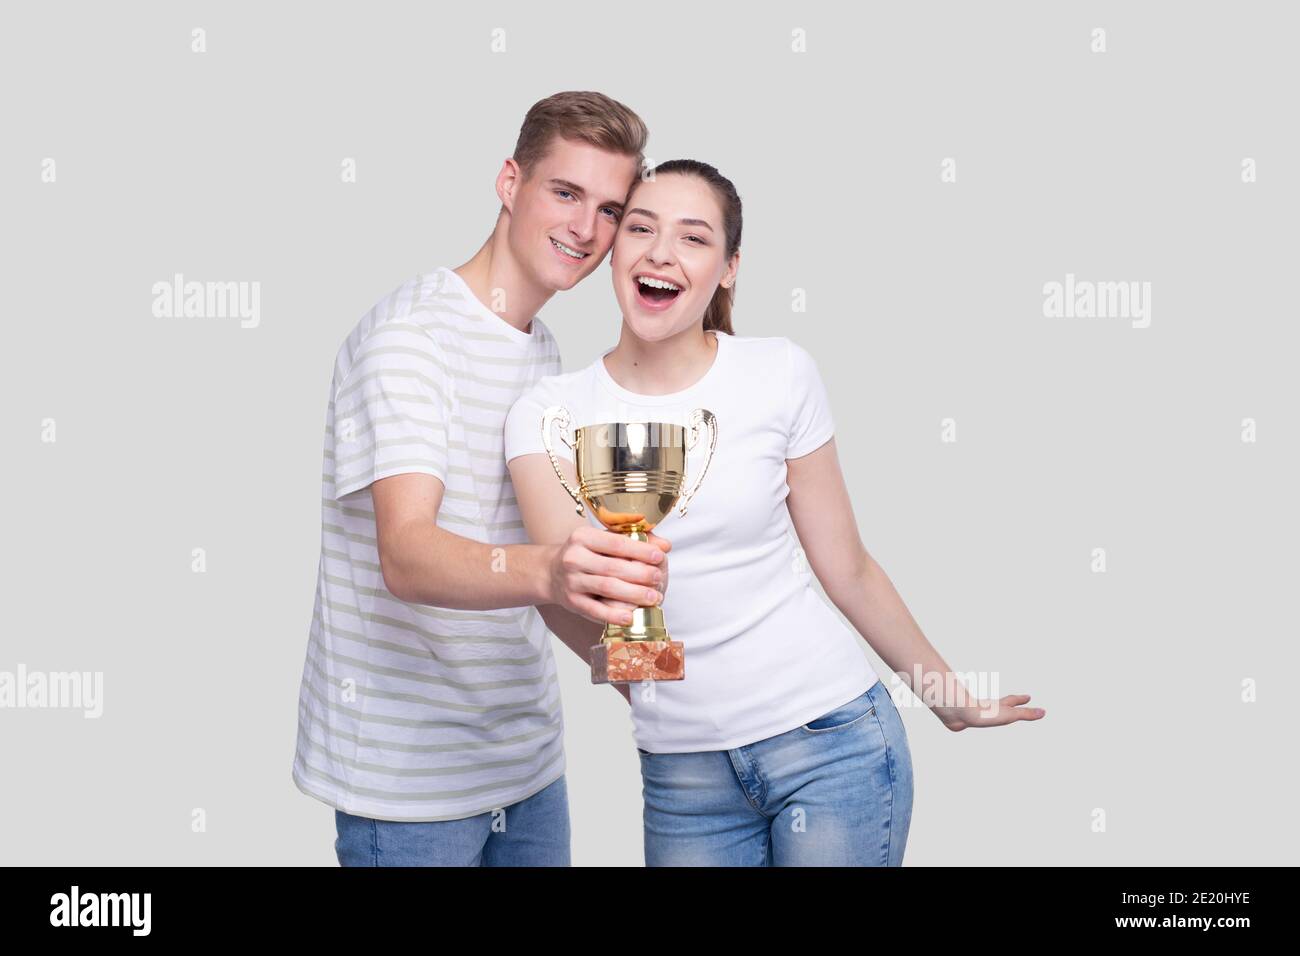 Couple Holding Trophy Happy Isolated. Couple Goals. Winners Stock Photo